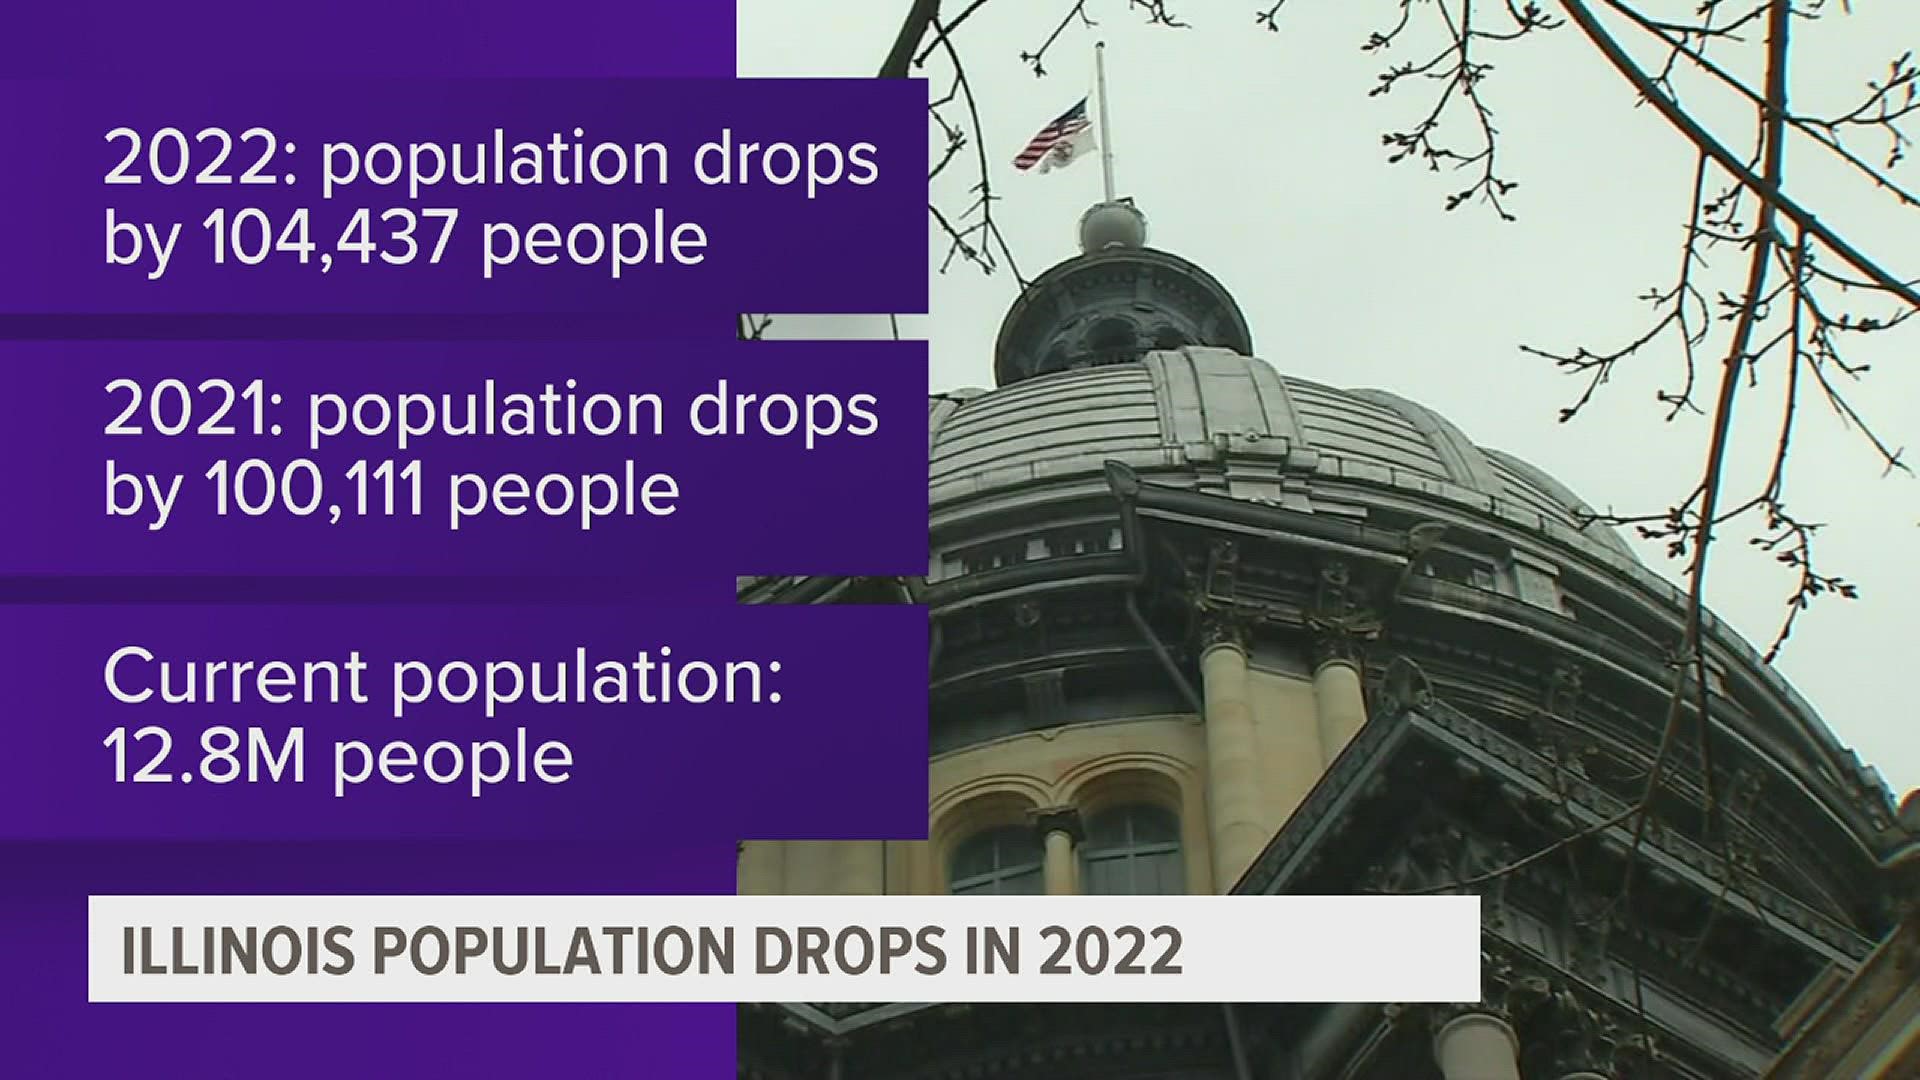 Illinois is the sixth most populous state, but it still lost more than 104,000 people in 2022.